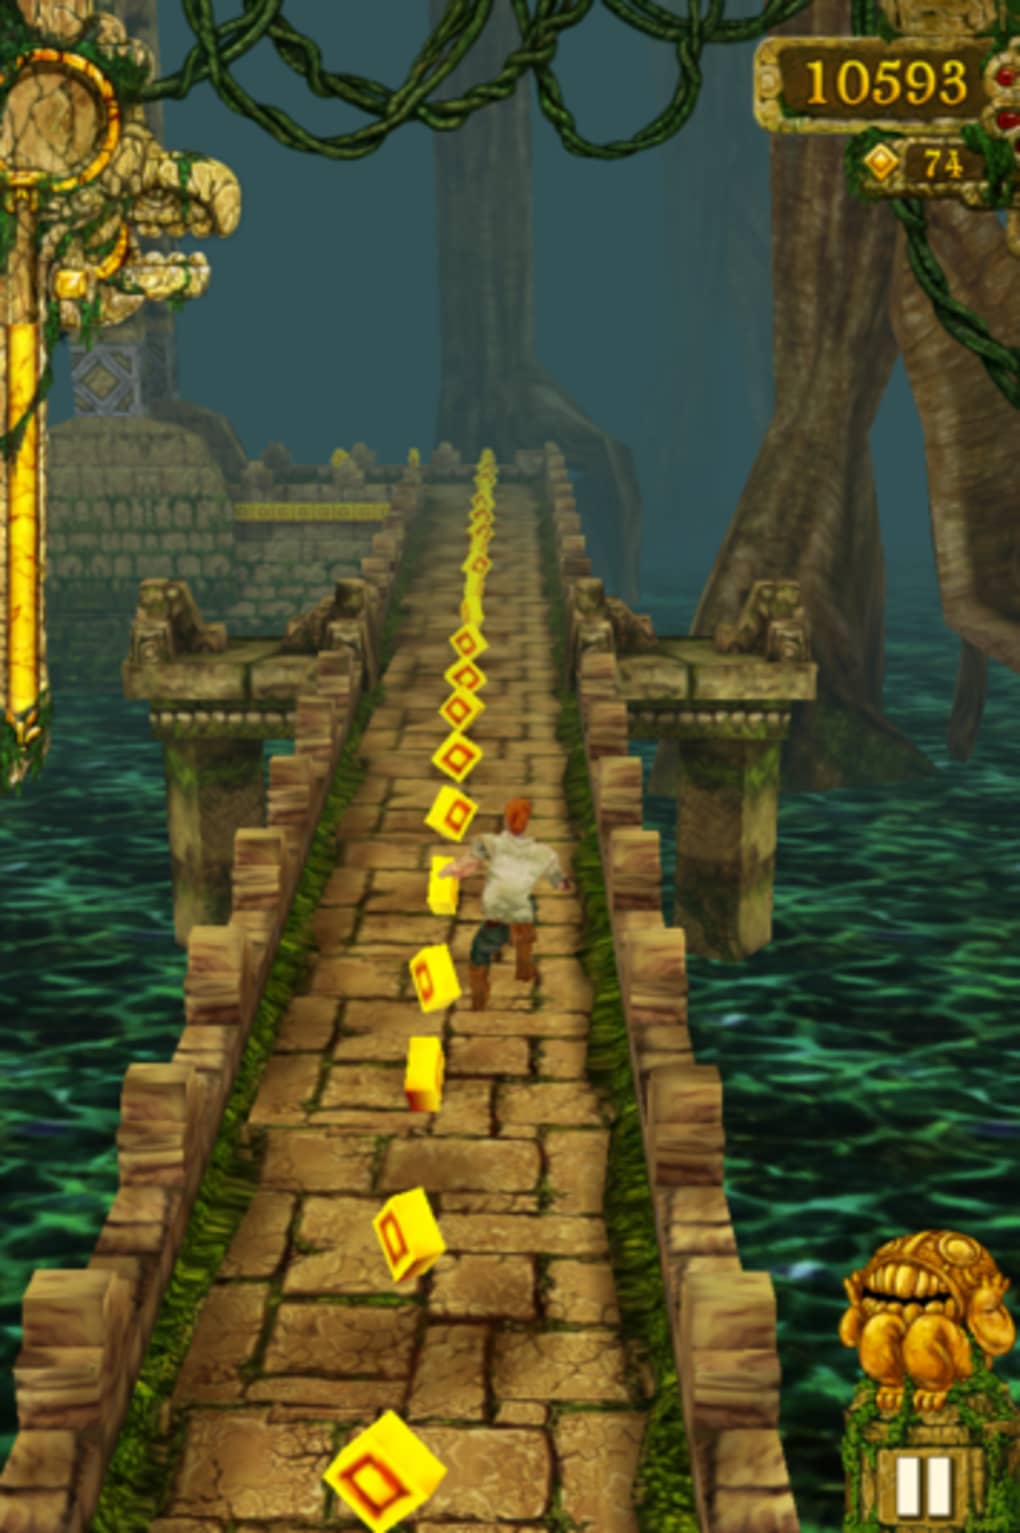 Free Download Temple Run 1 Game For Android - dogyellow